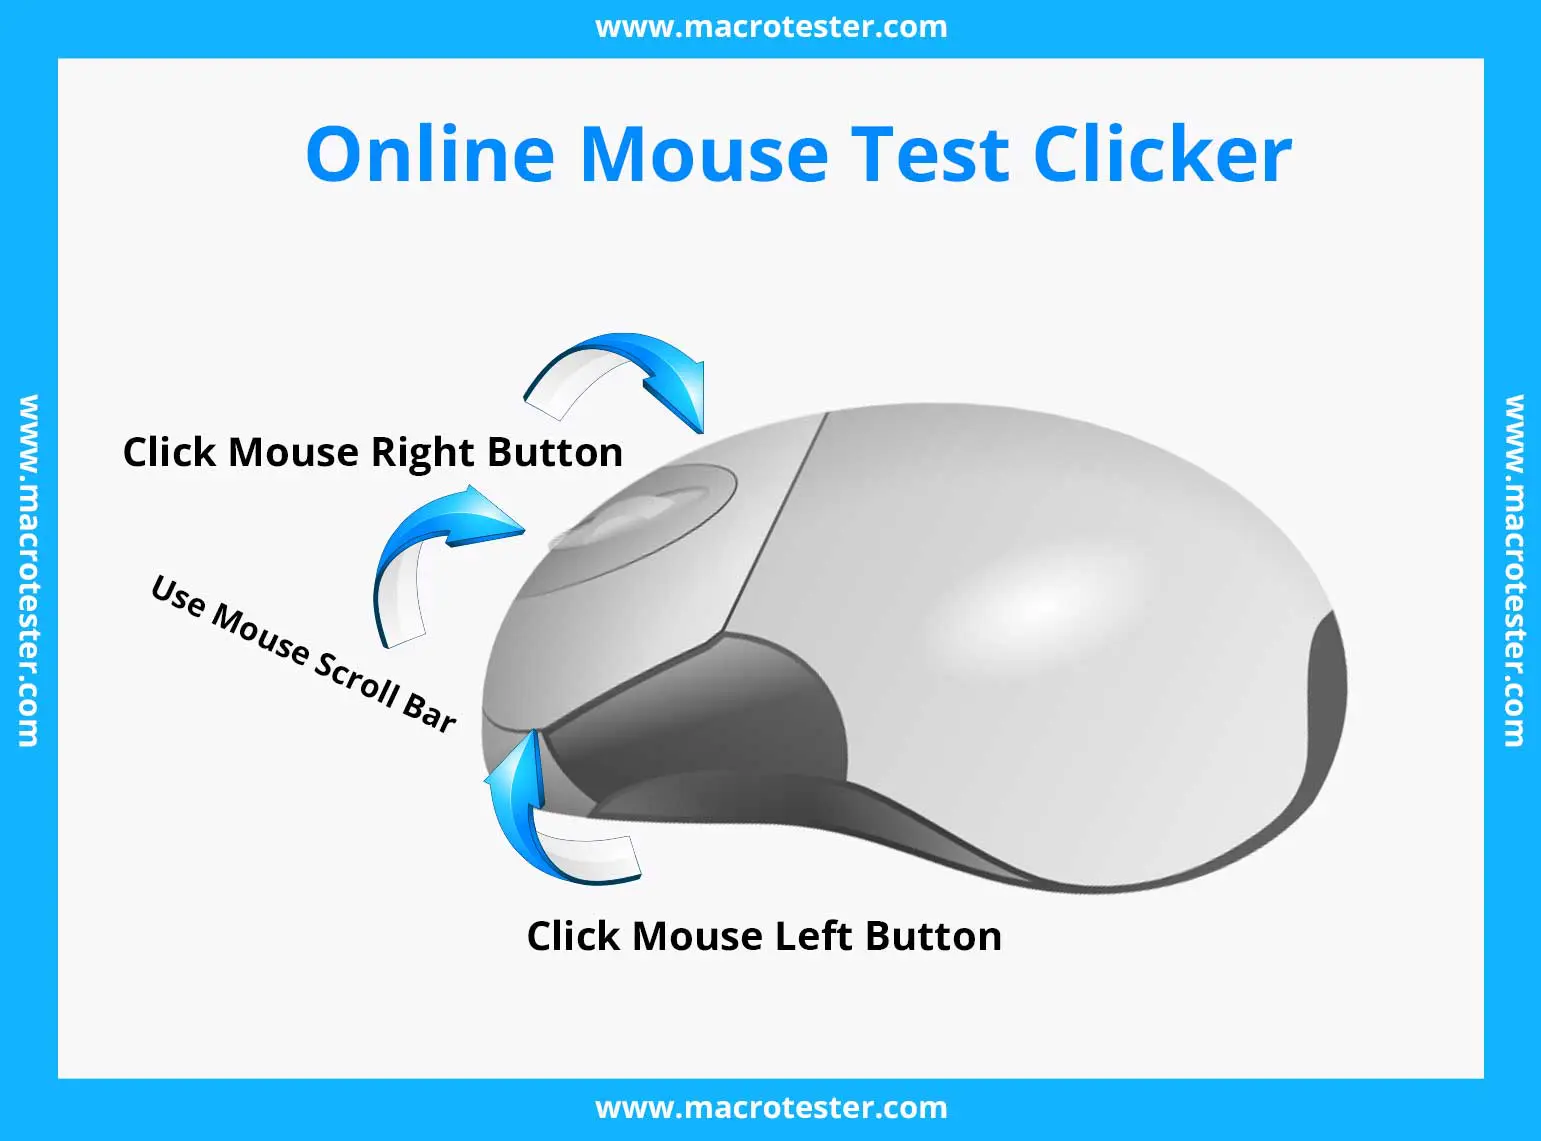 Mouse Tester Clicker  Test Your Mouse Left, Right & Drag